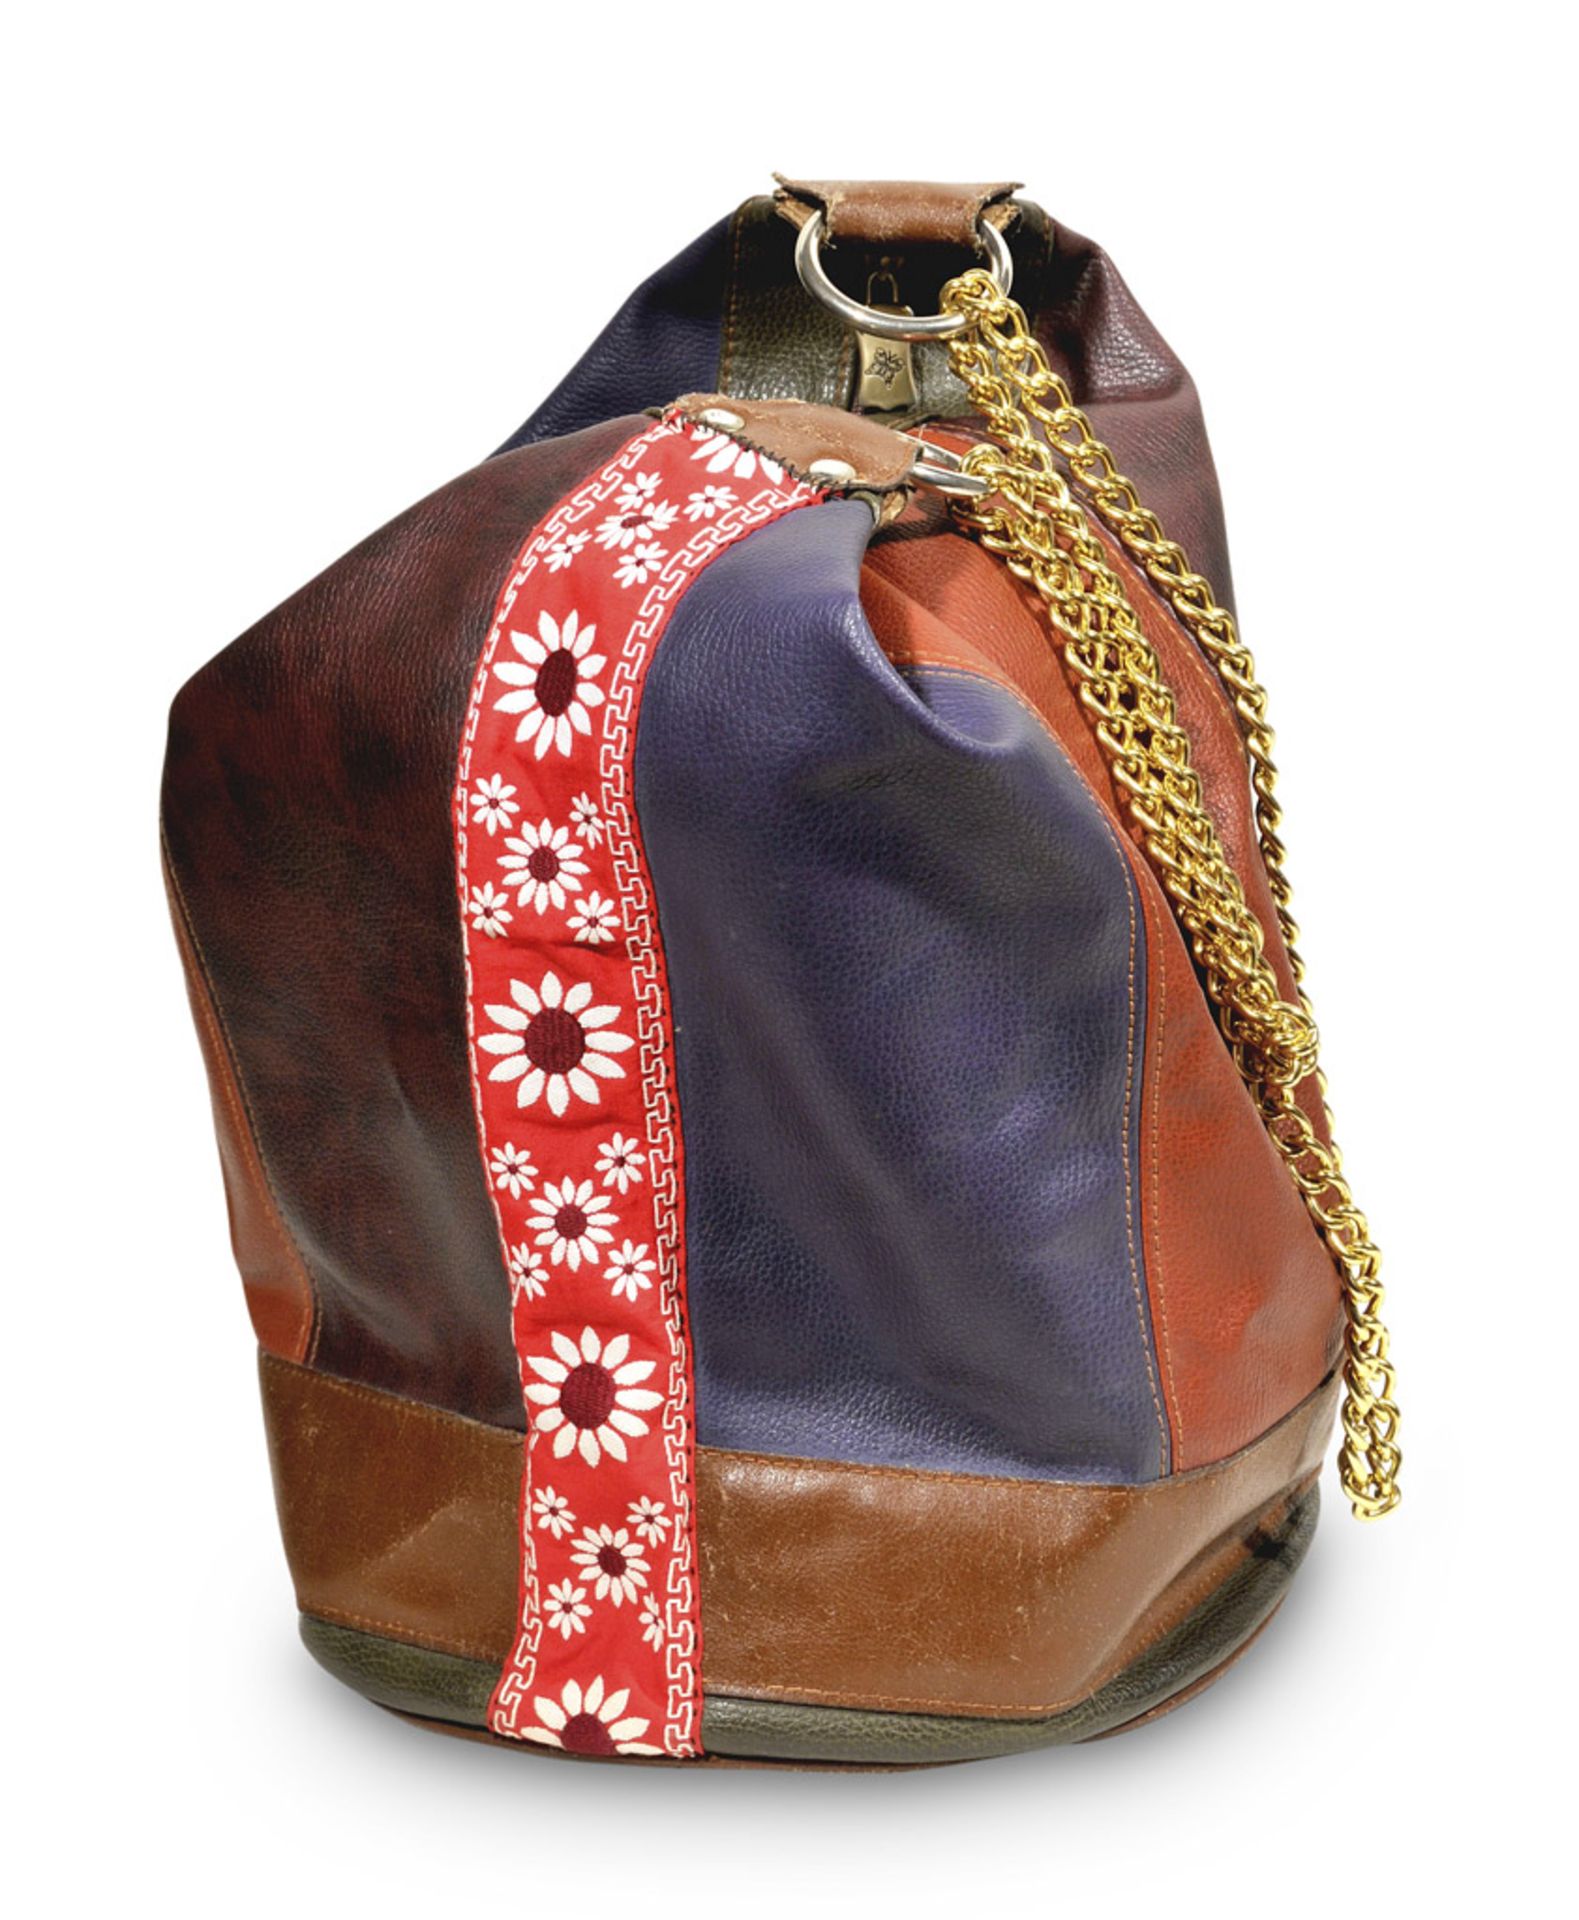 BUCKET PURSE, 1970S in leather of different colors with center braid and gilded chain shoulder